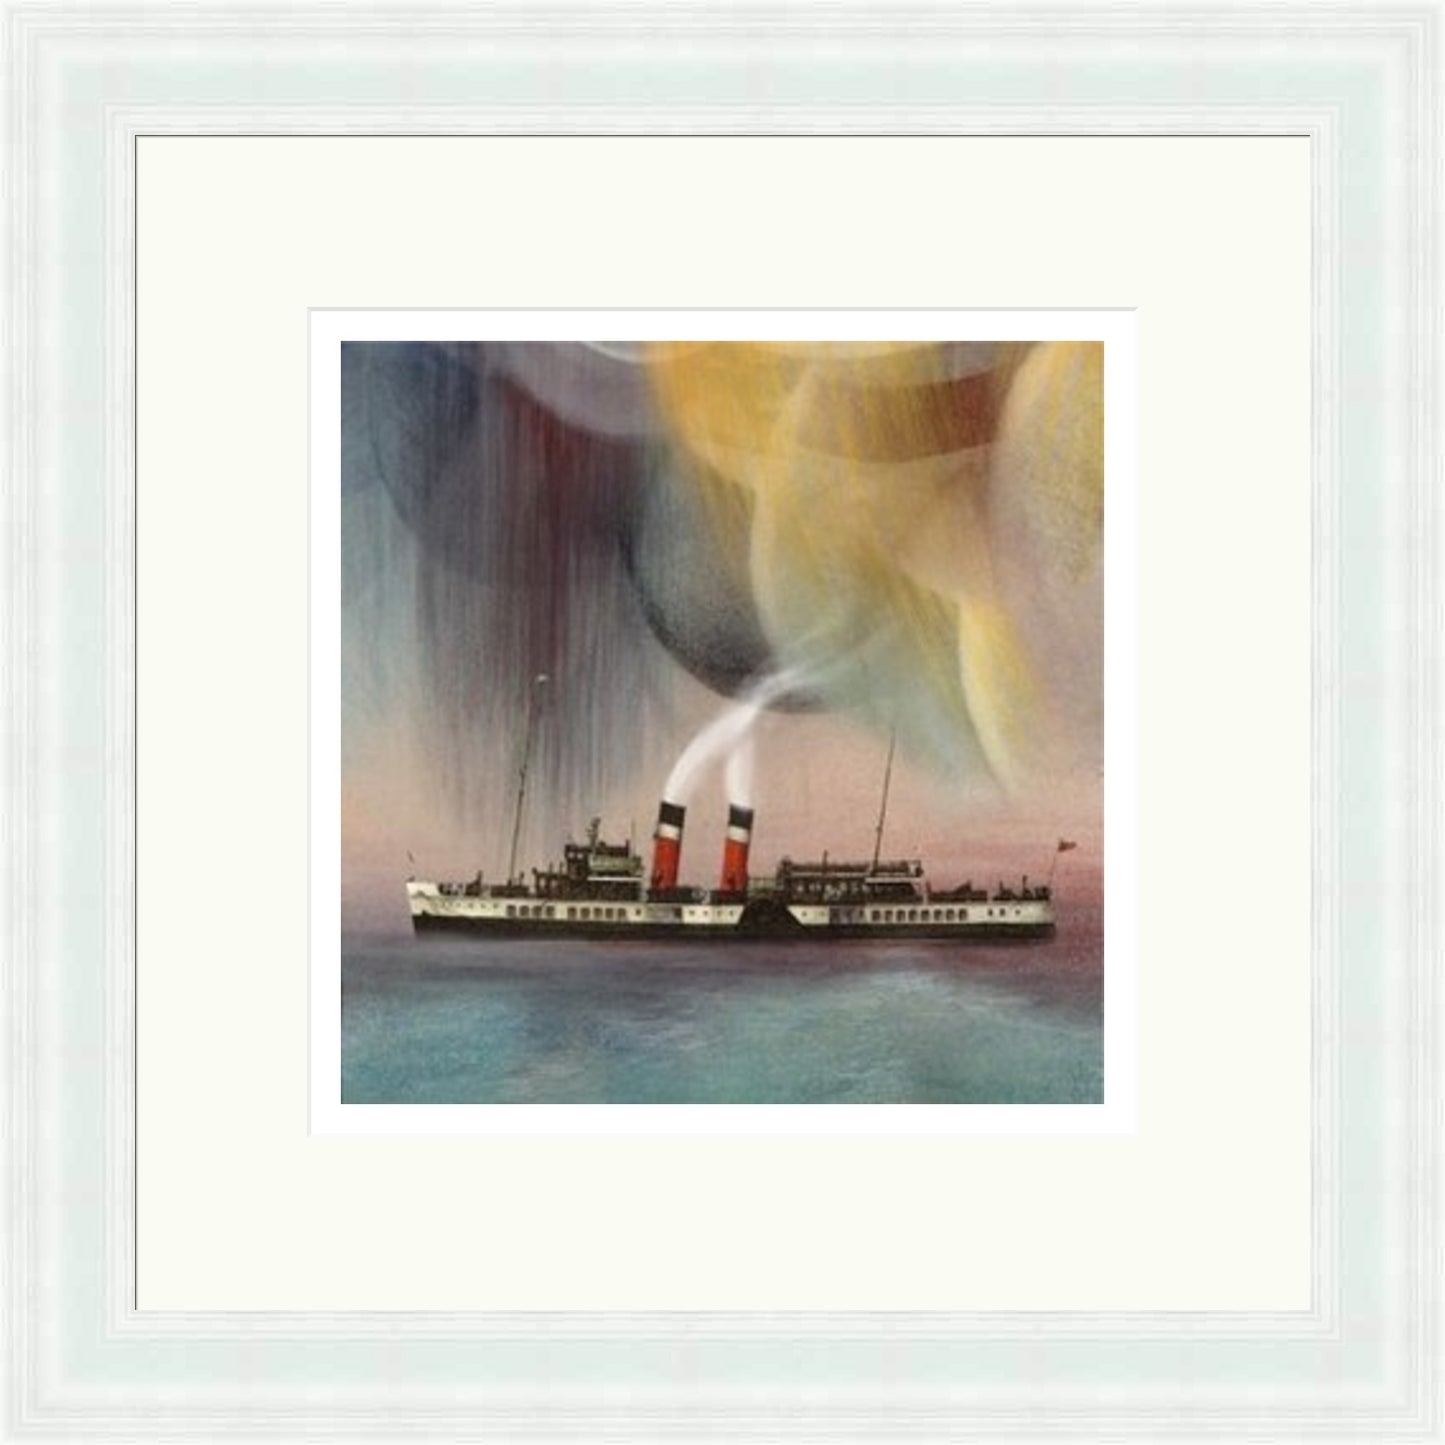 PS Waverley by Esther Cohen